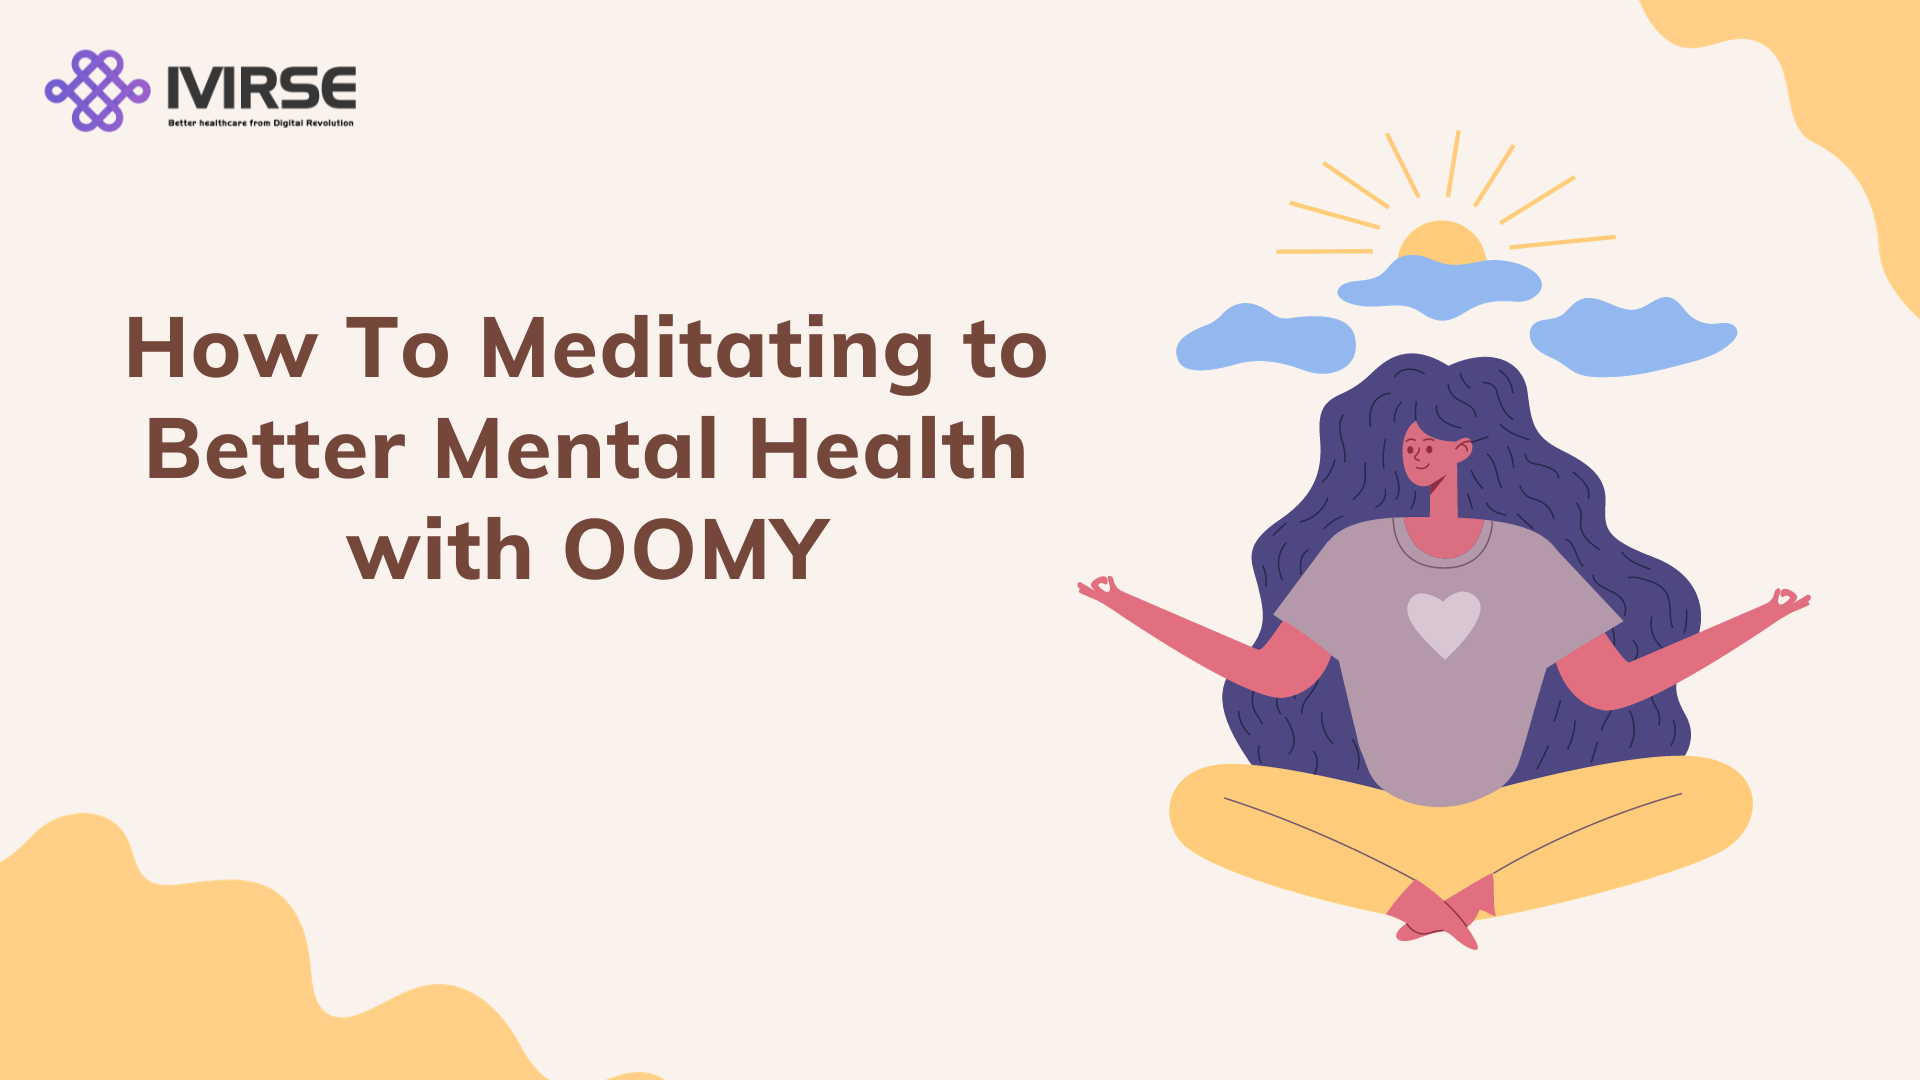 Meditating to better mental health with OOMY